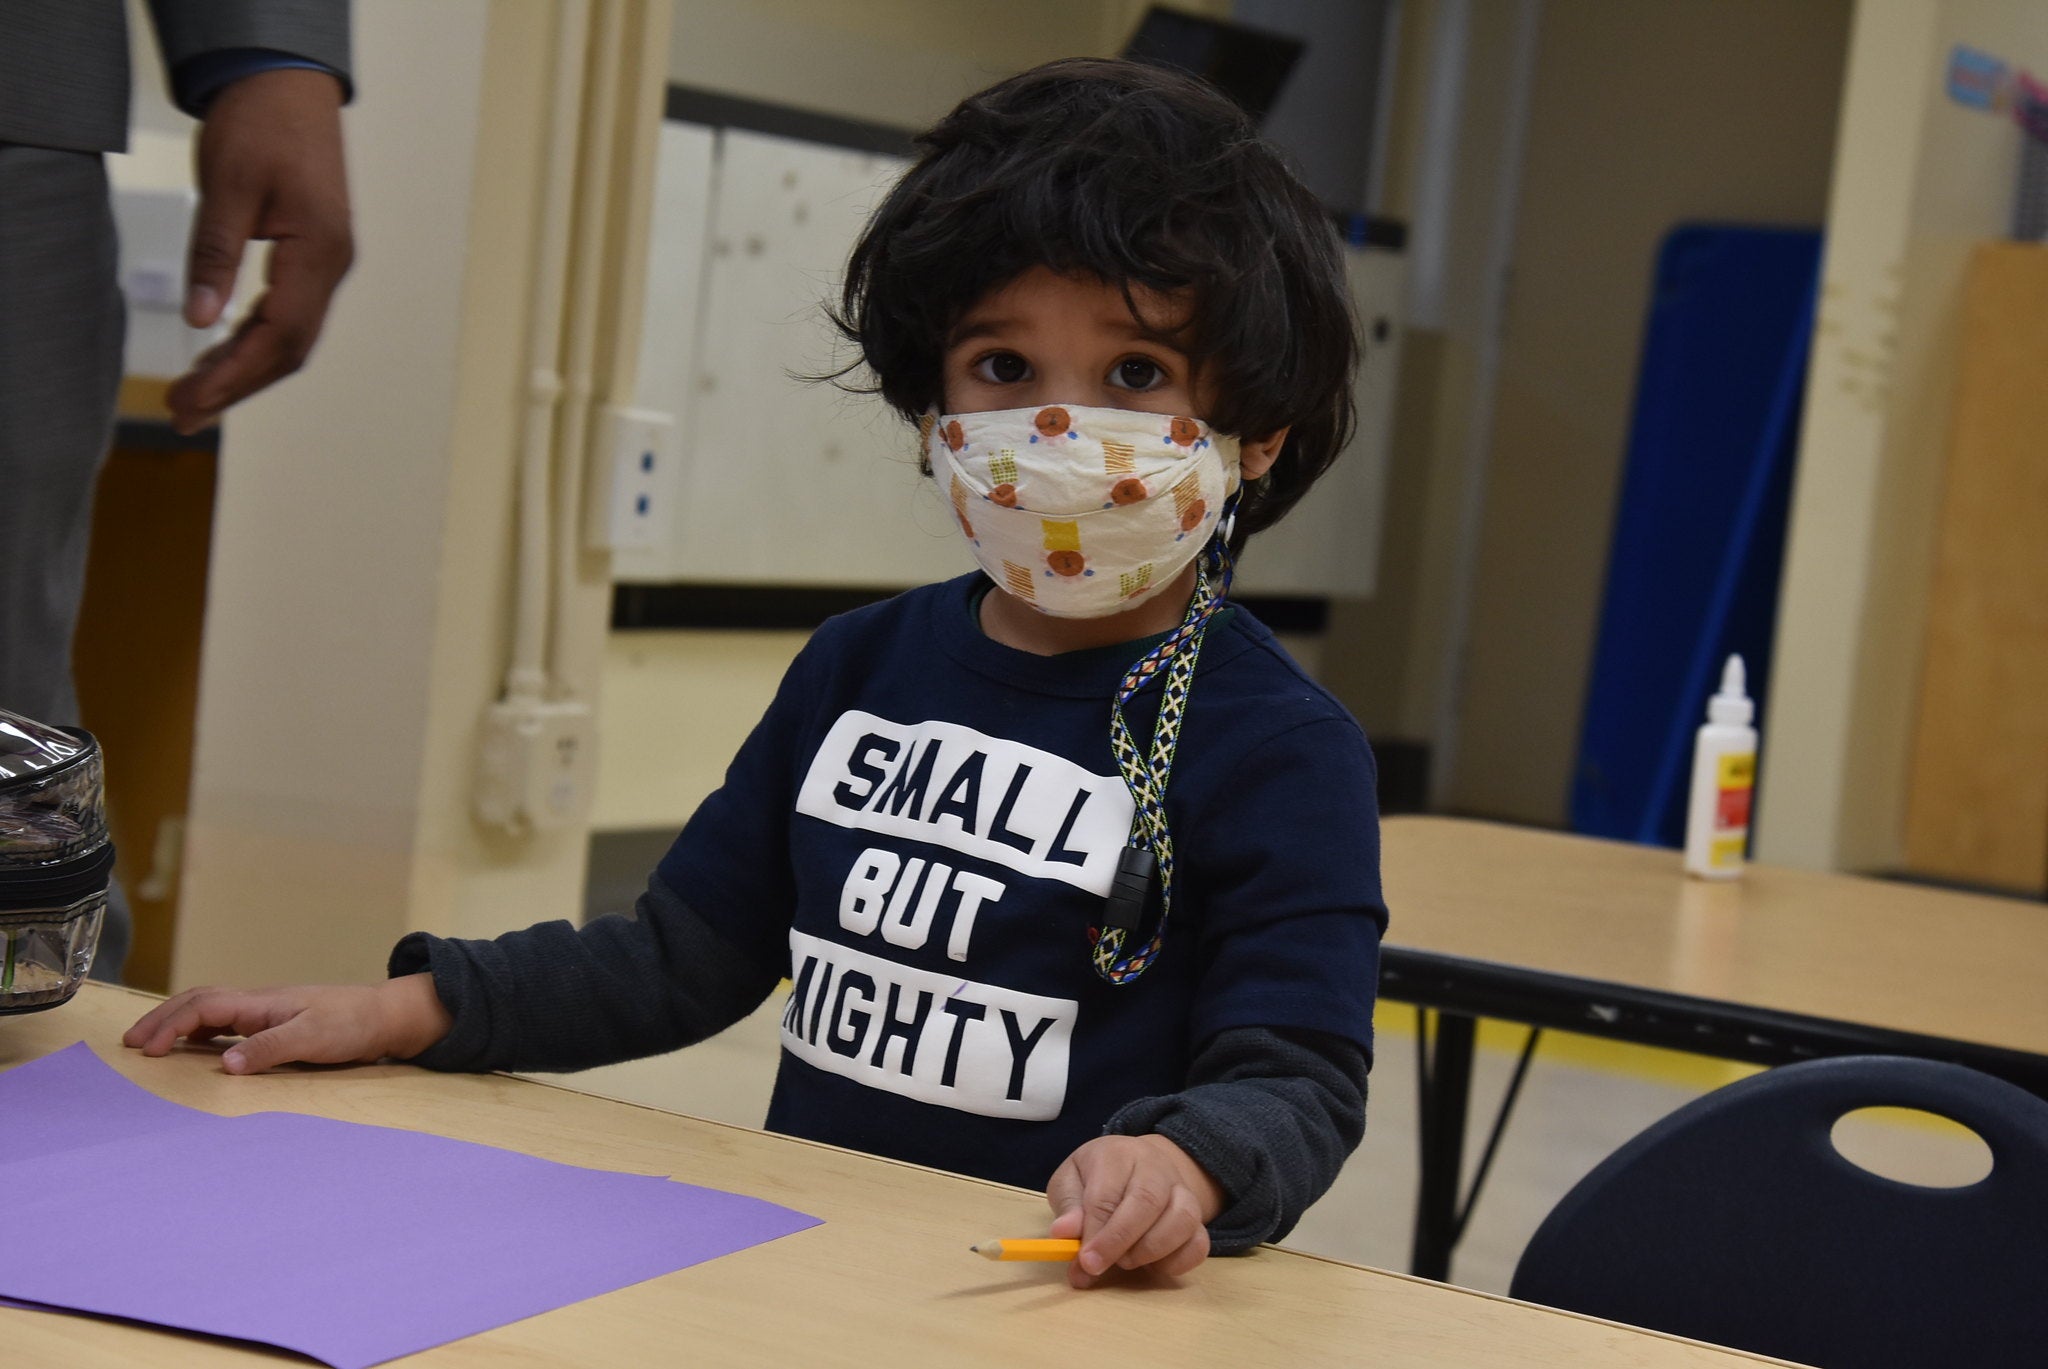 A young student wearing a mask and a shirt that reads "Small but mighty".